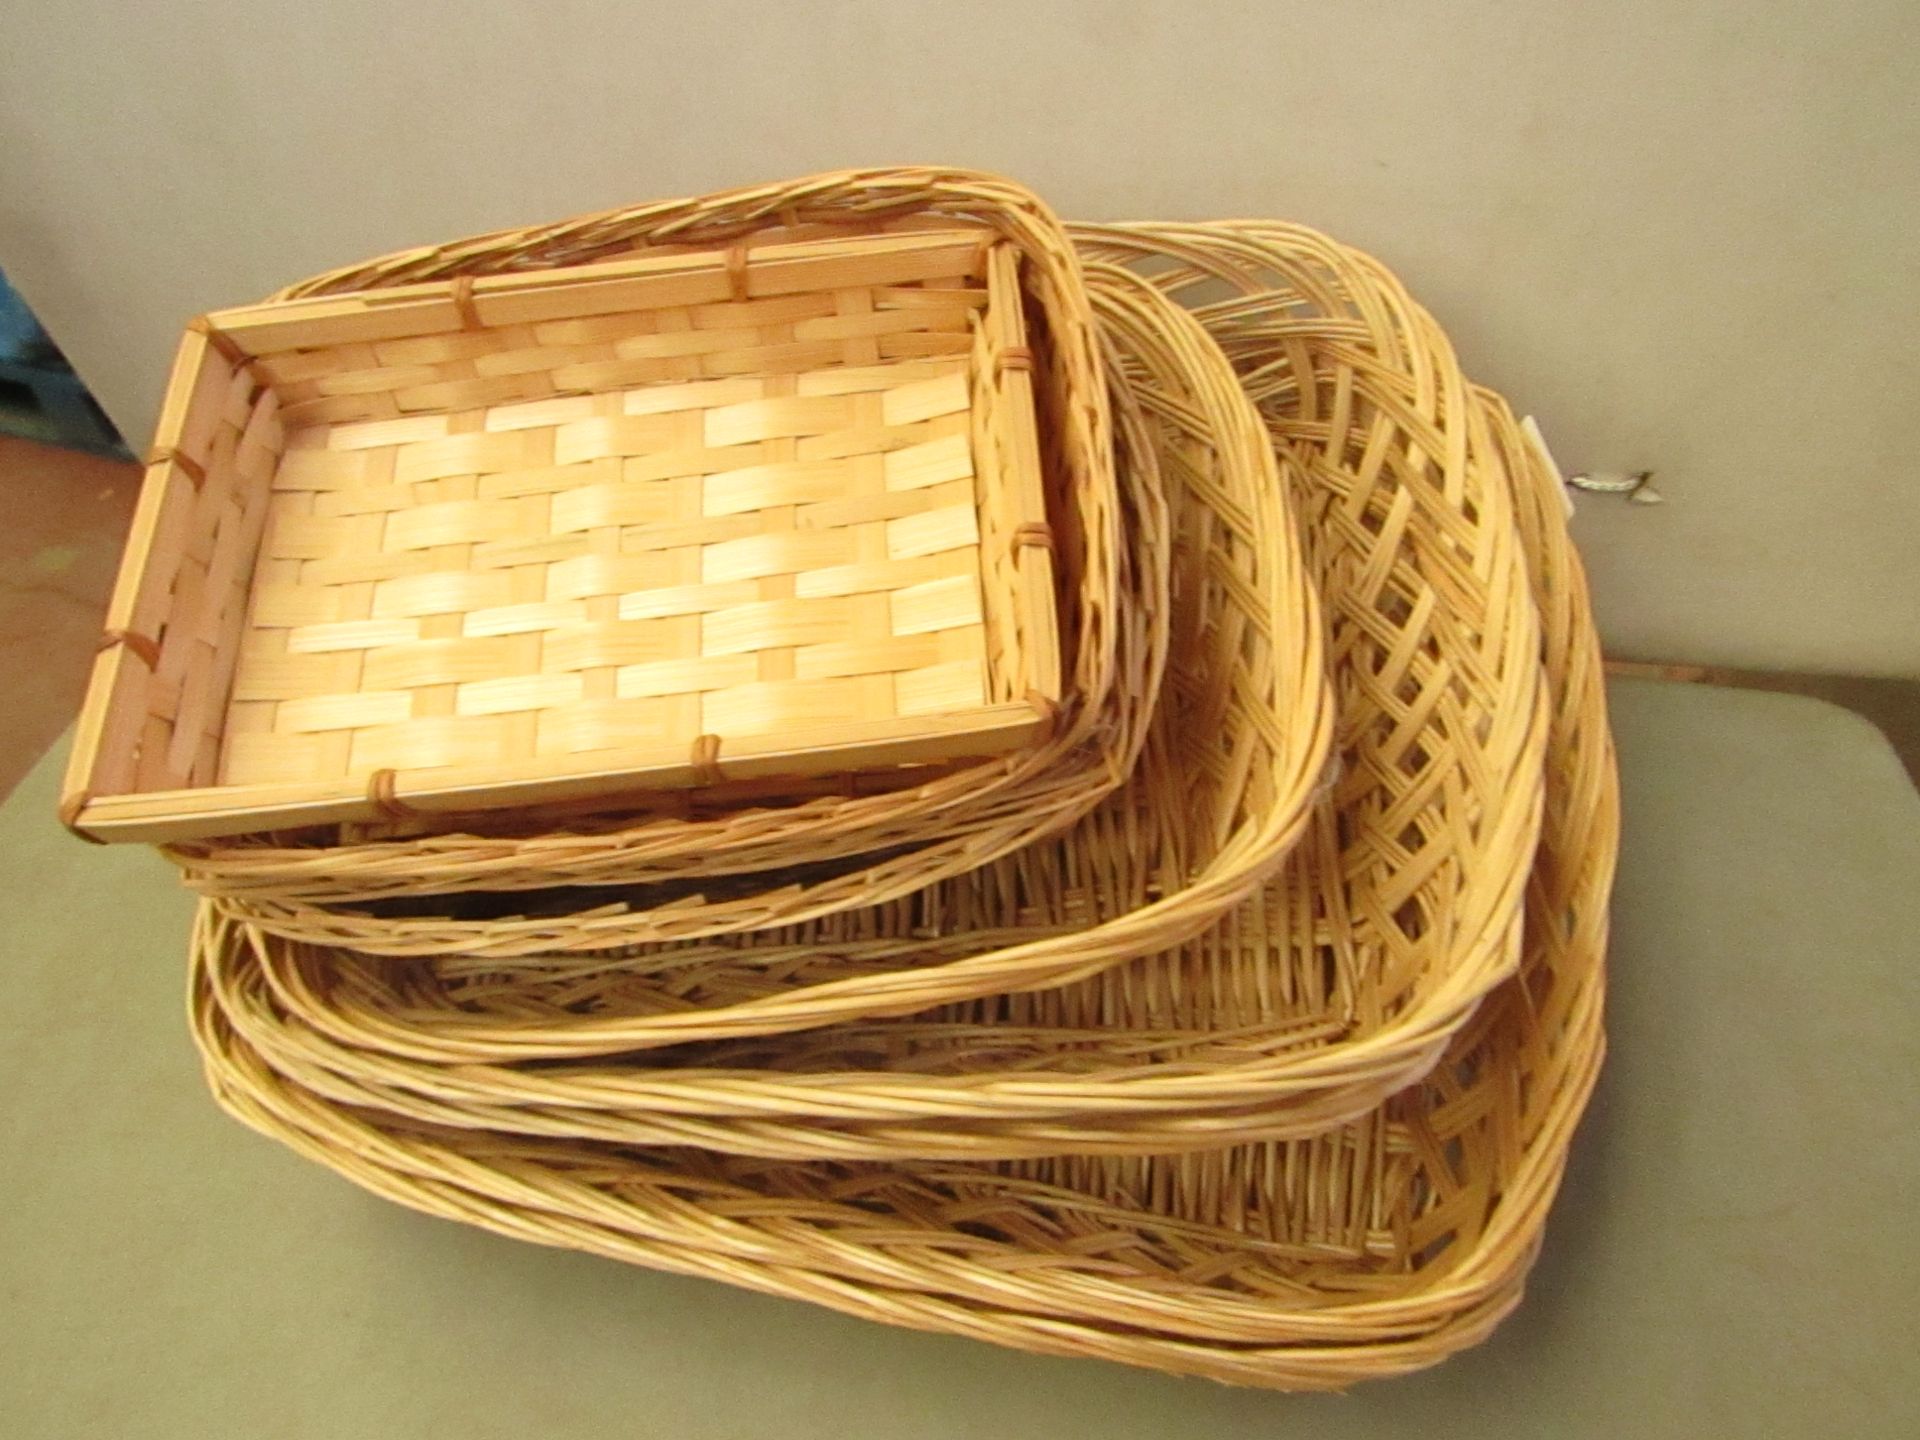 9 x various sizes of Wicker Baskets all new